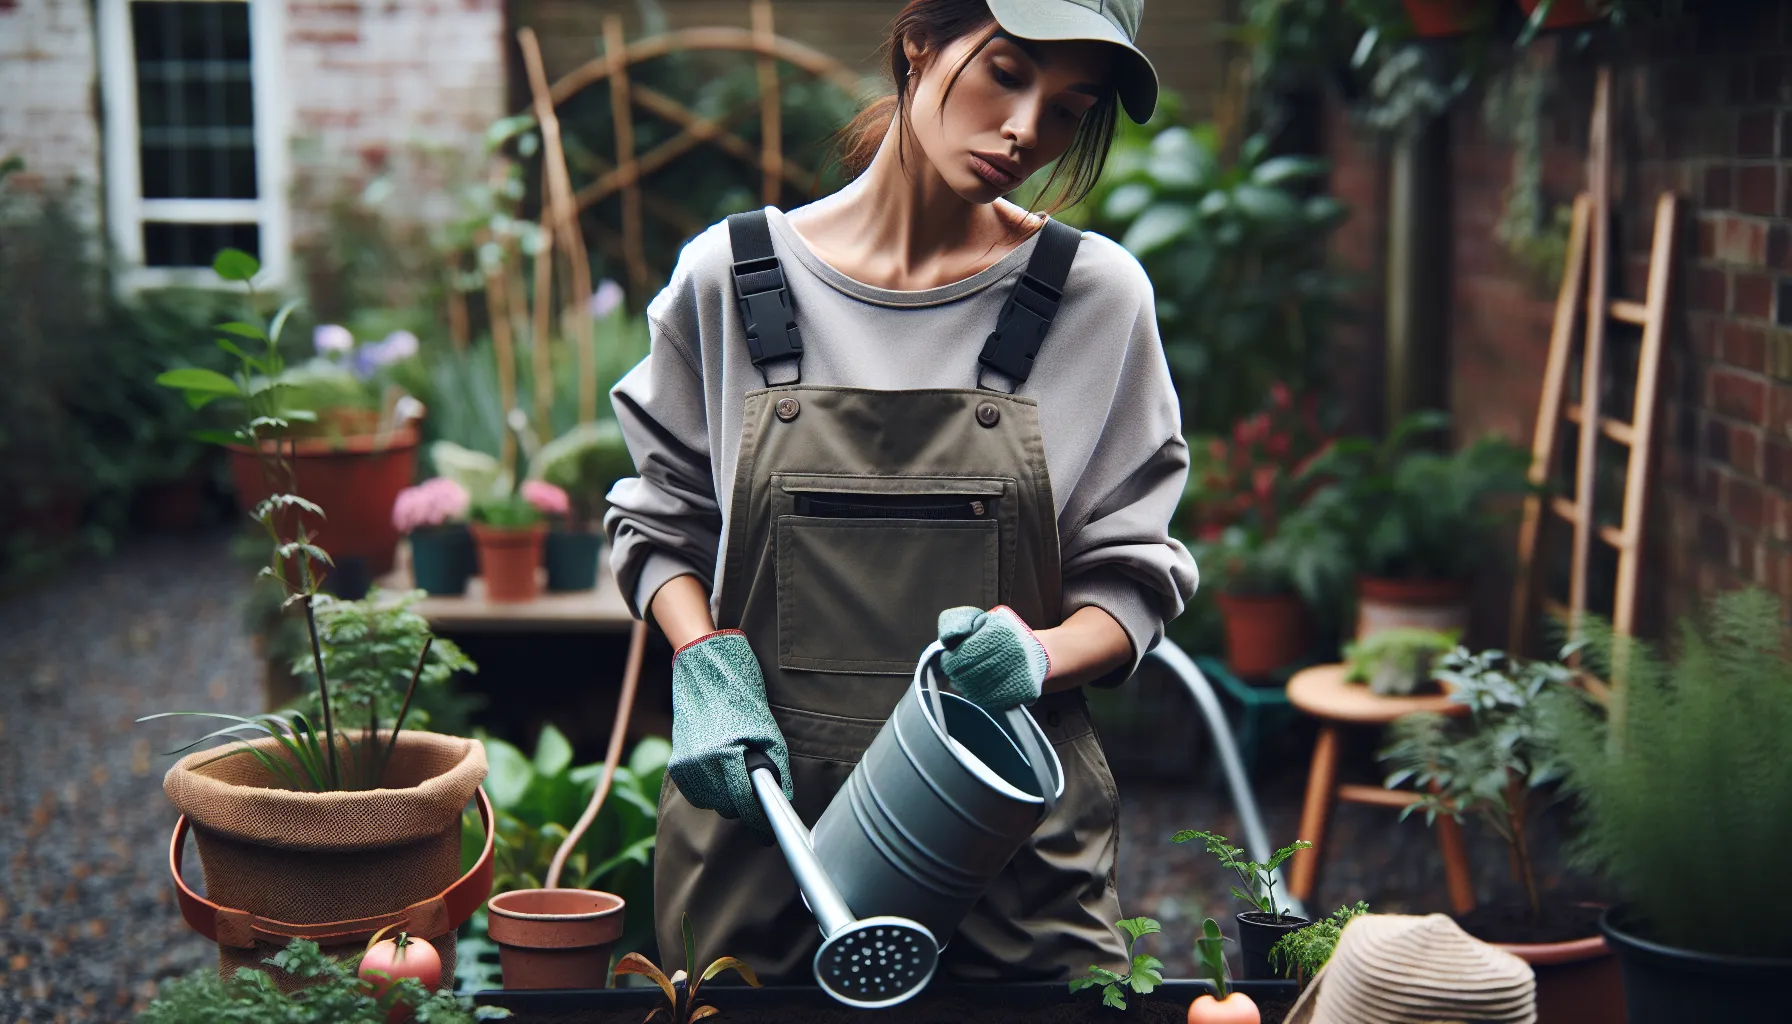 A person in gardening overalls holds a watering can among potted plants in a cozy home garden setting.